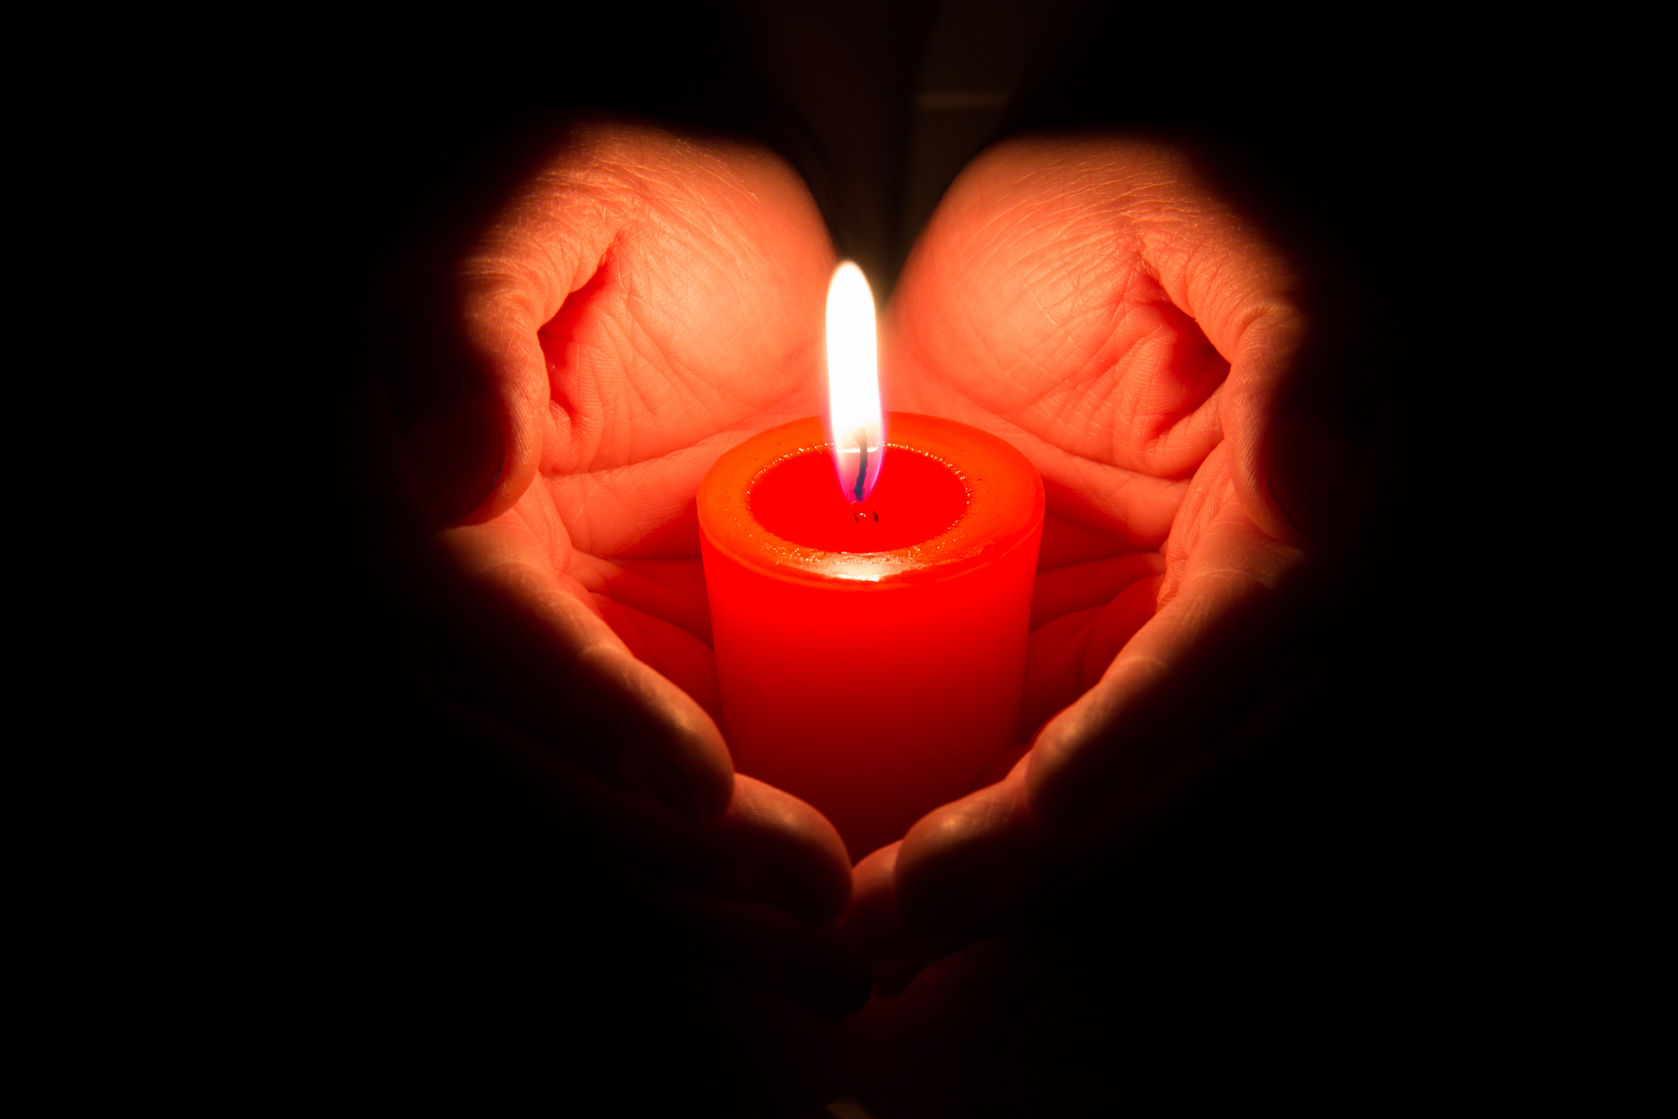 Heart Hands Holding a Candle.jpg